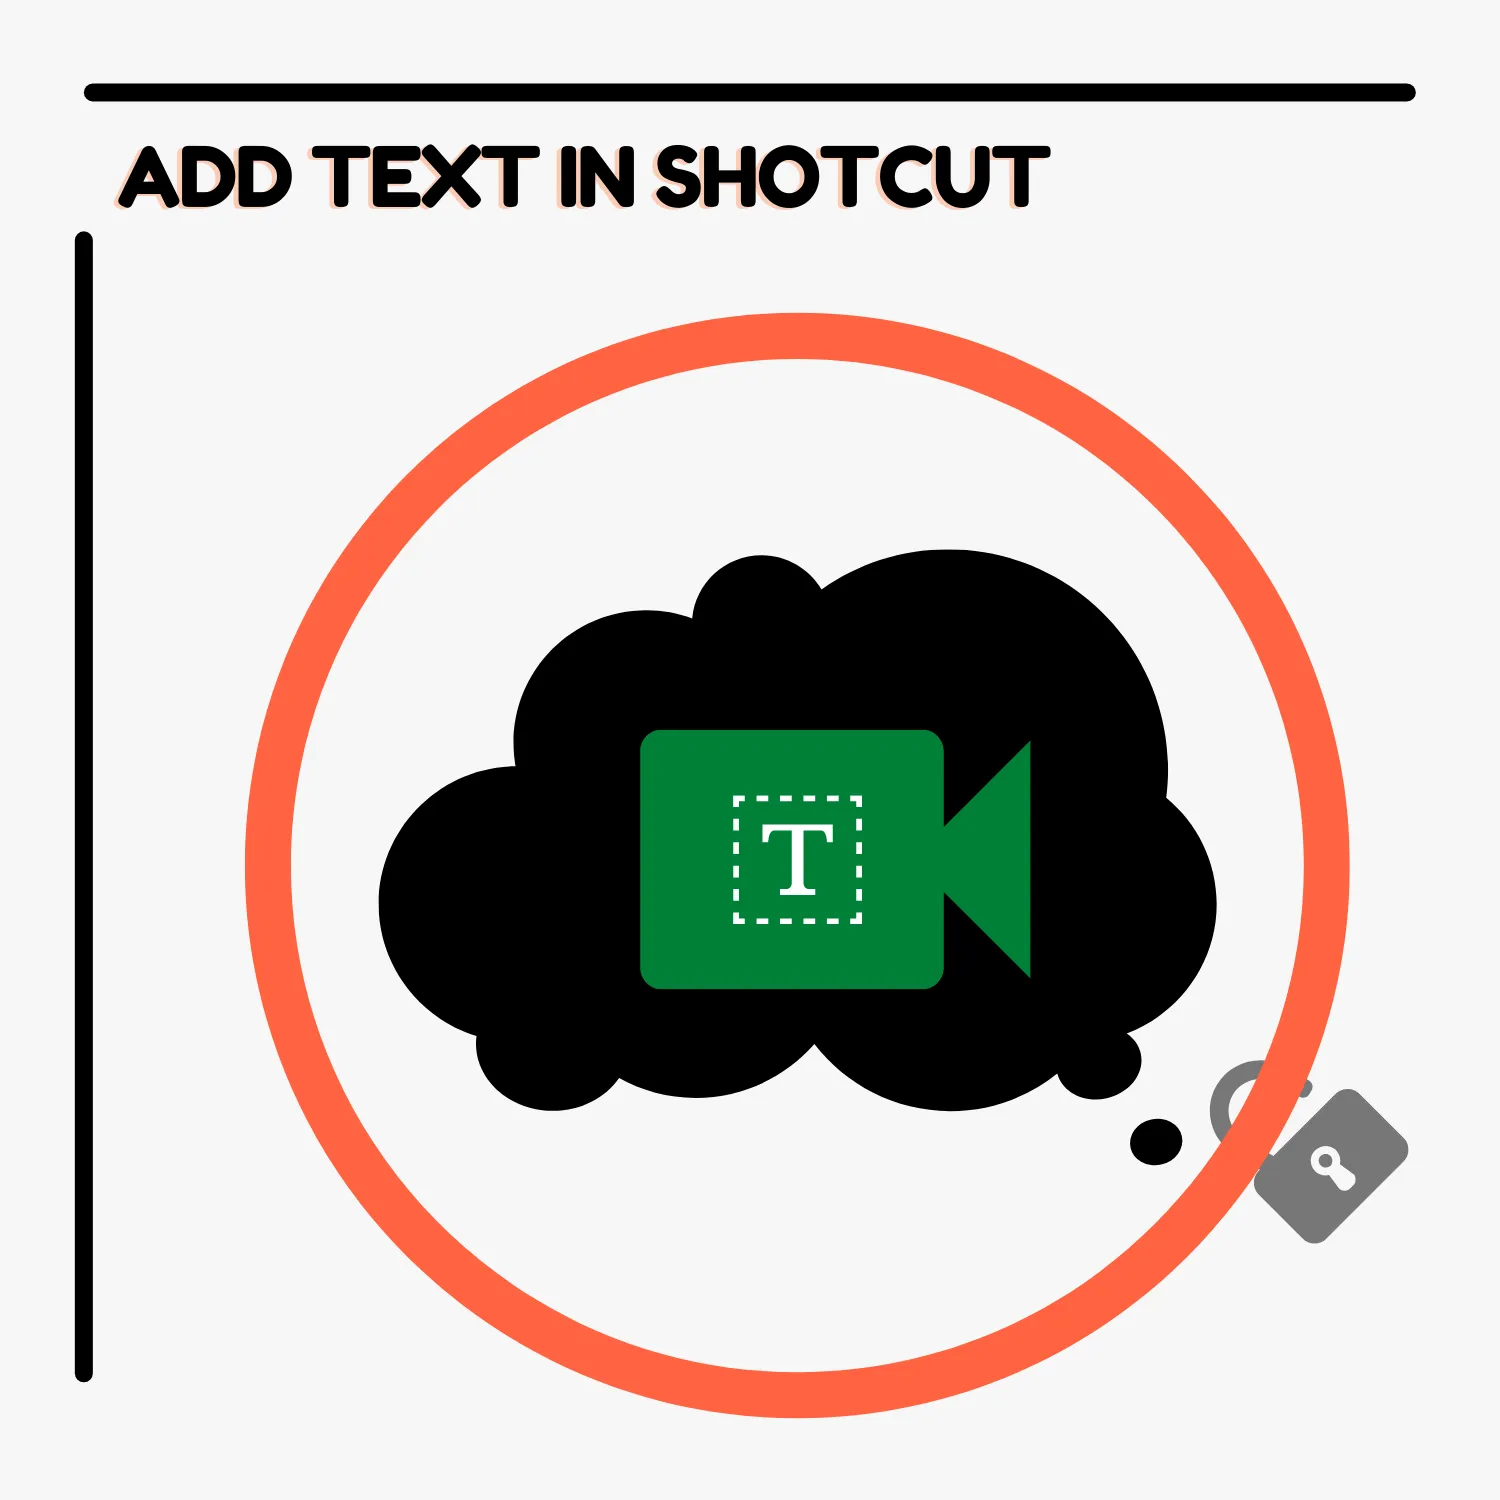 How to Add Text in Shotcut